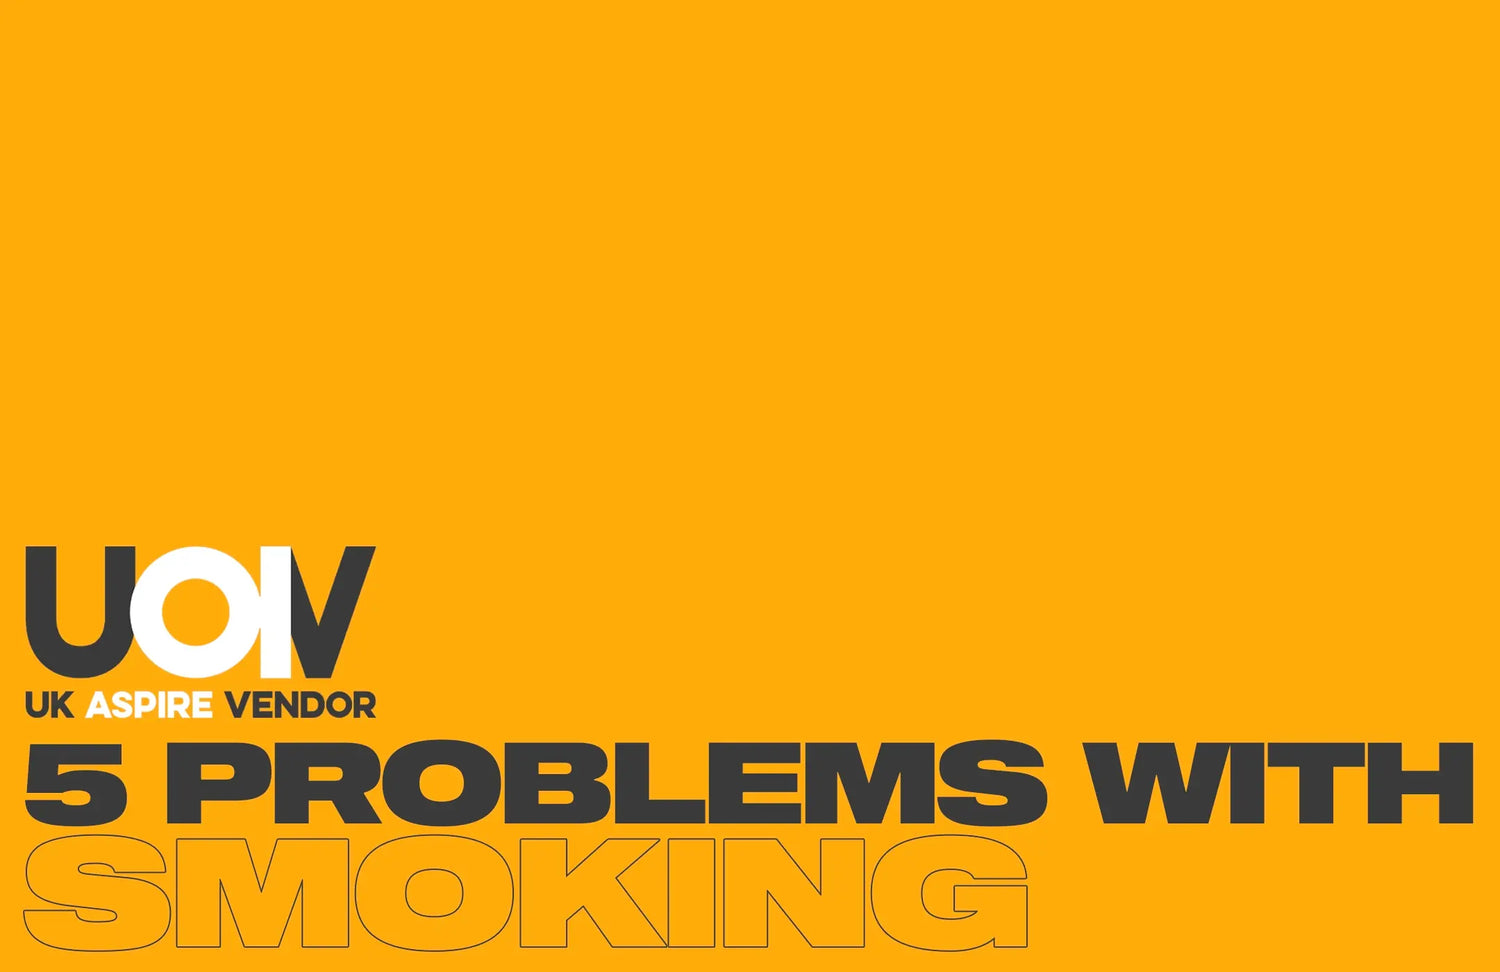 In this blog article, we explore in great detail the main differences between smoking and vaping, including five problems that smokers face that vapers do not.